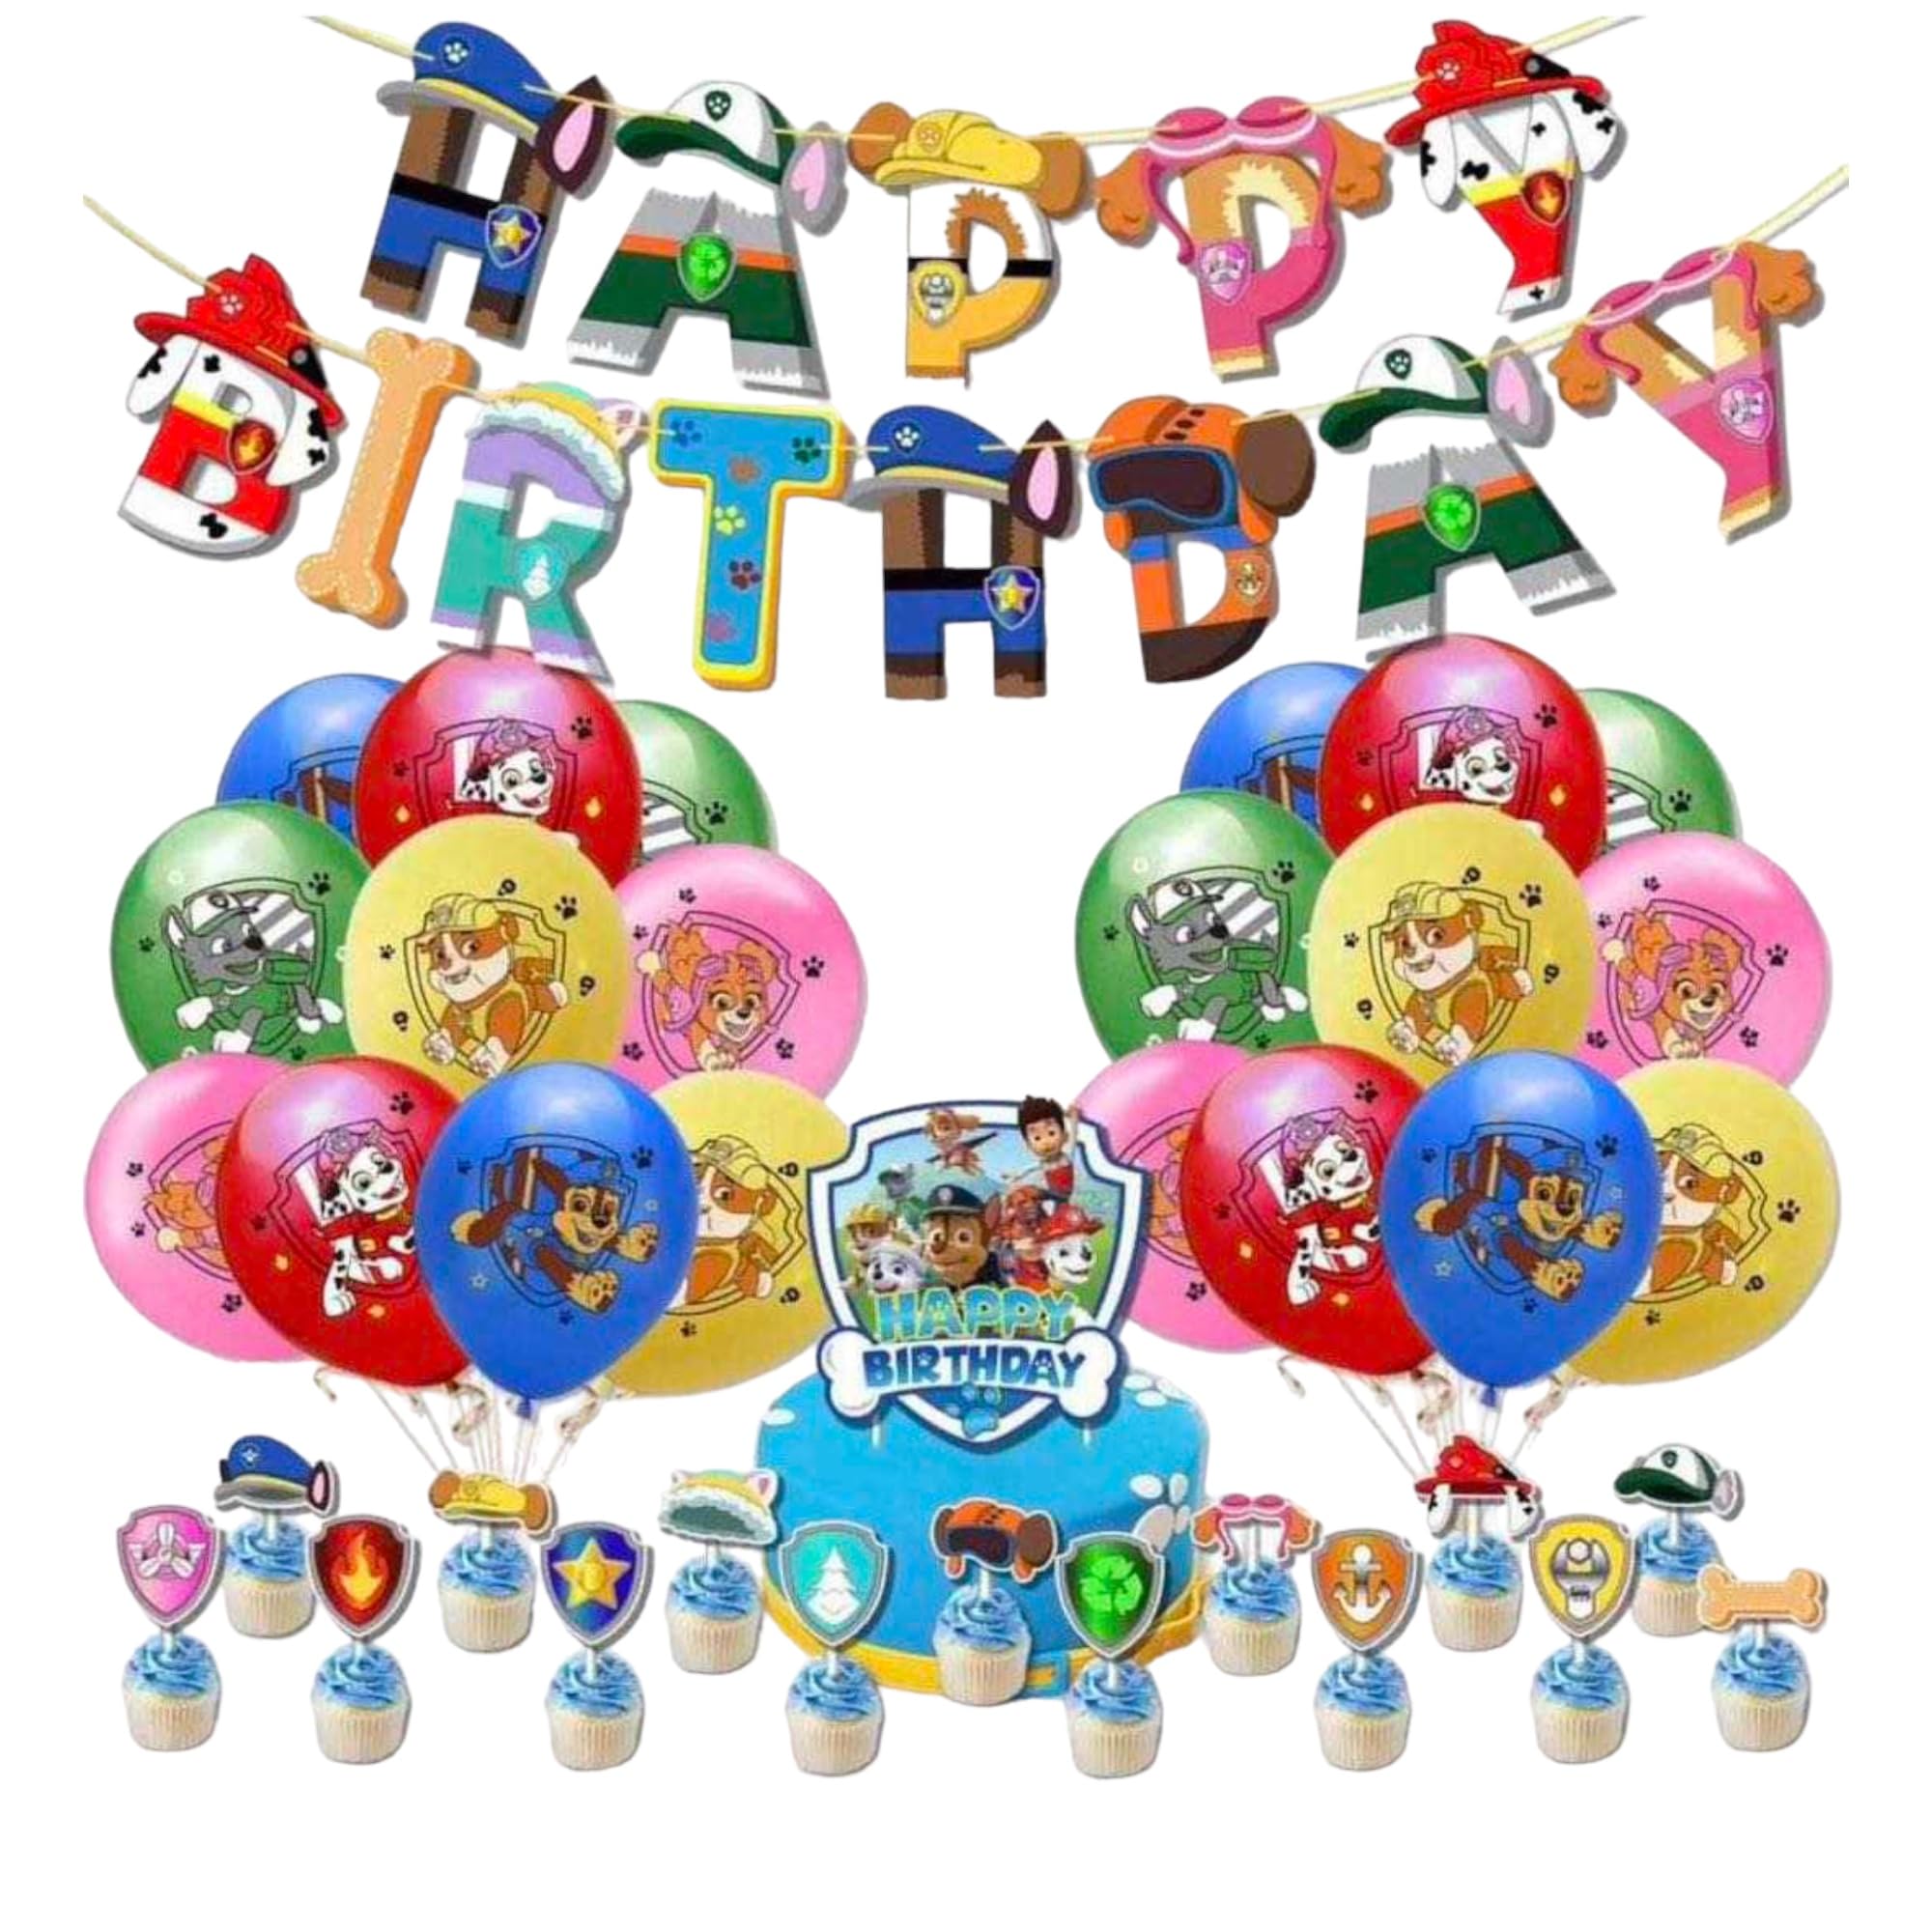 Paw Dog Patrol Birthday Decorations and Banner - Paw Dog Patrol Party Balloons - Character Cake Topper and Cupcake Picks - Kids Dog Theme Birthday Party by Jolly Jon